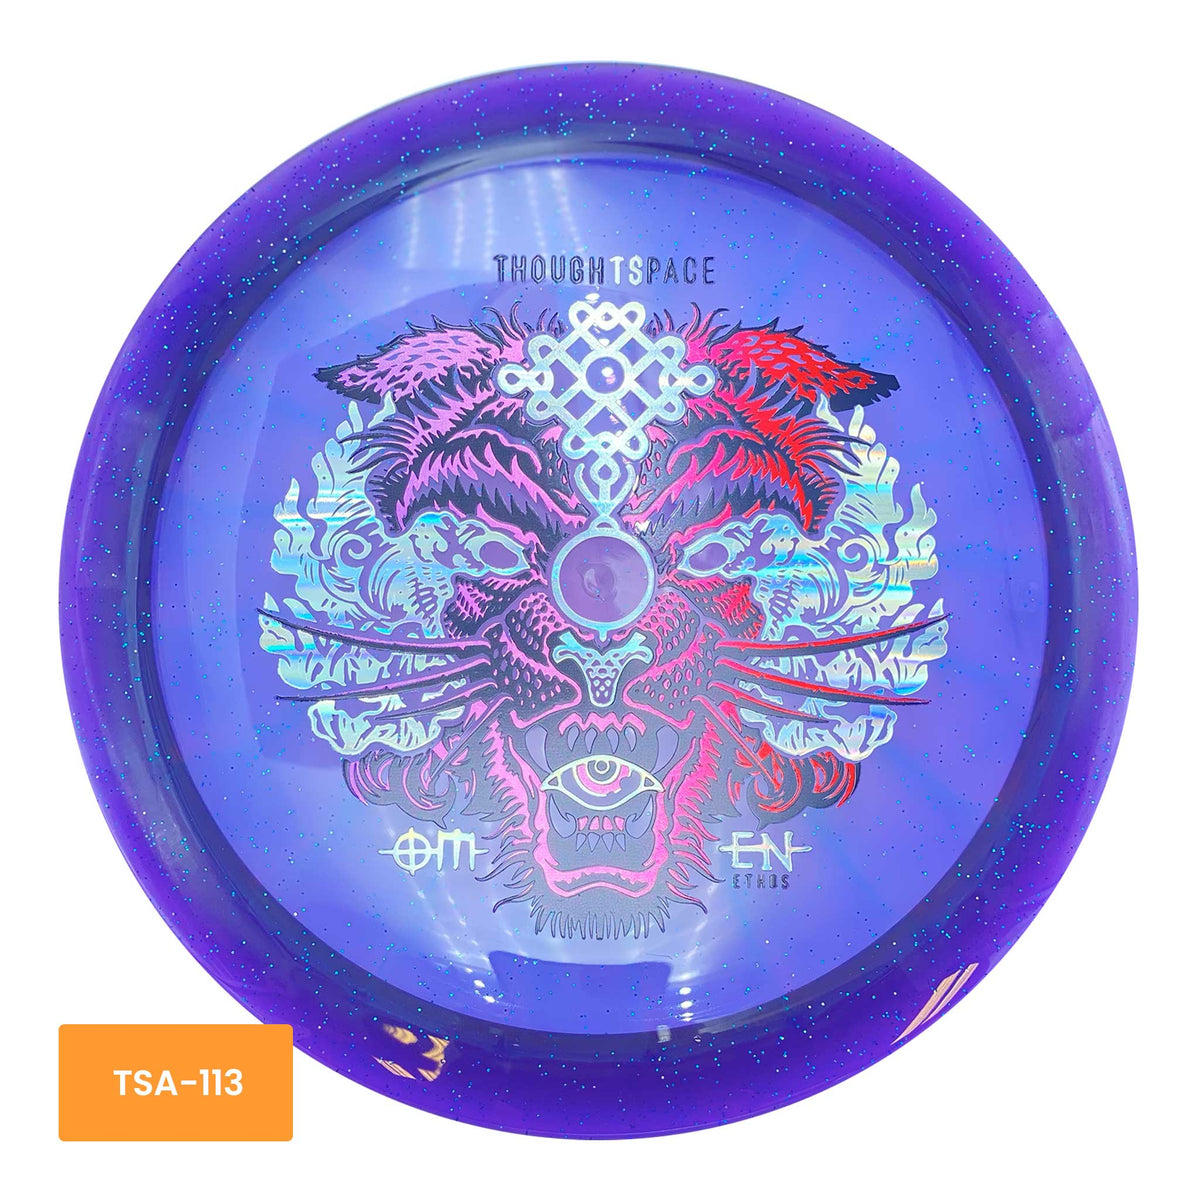 Thought Space Athletics Ethos Omen driver - Purple